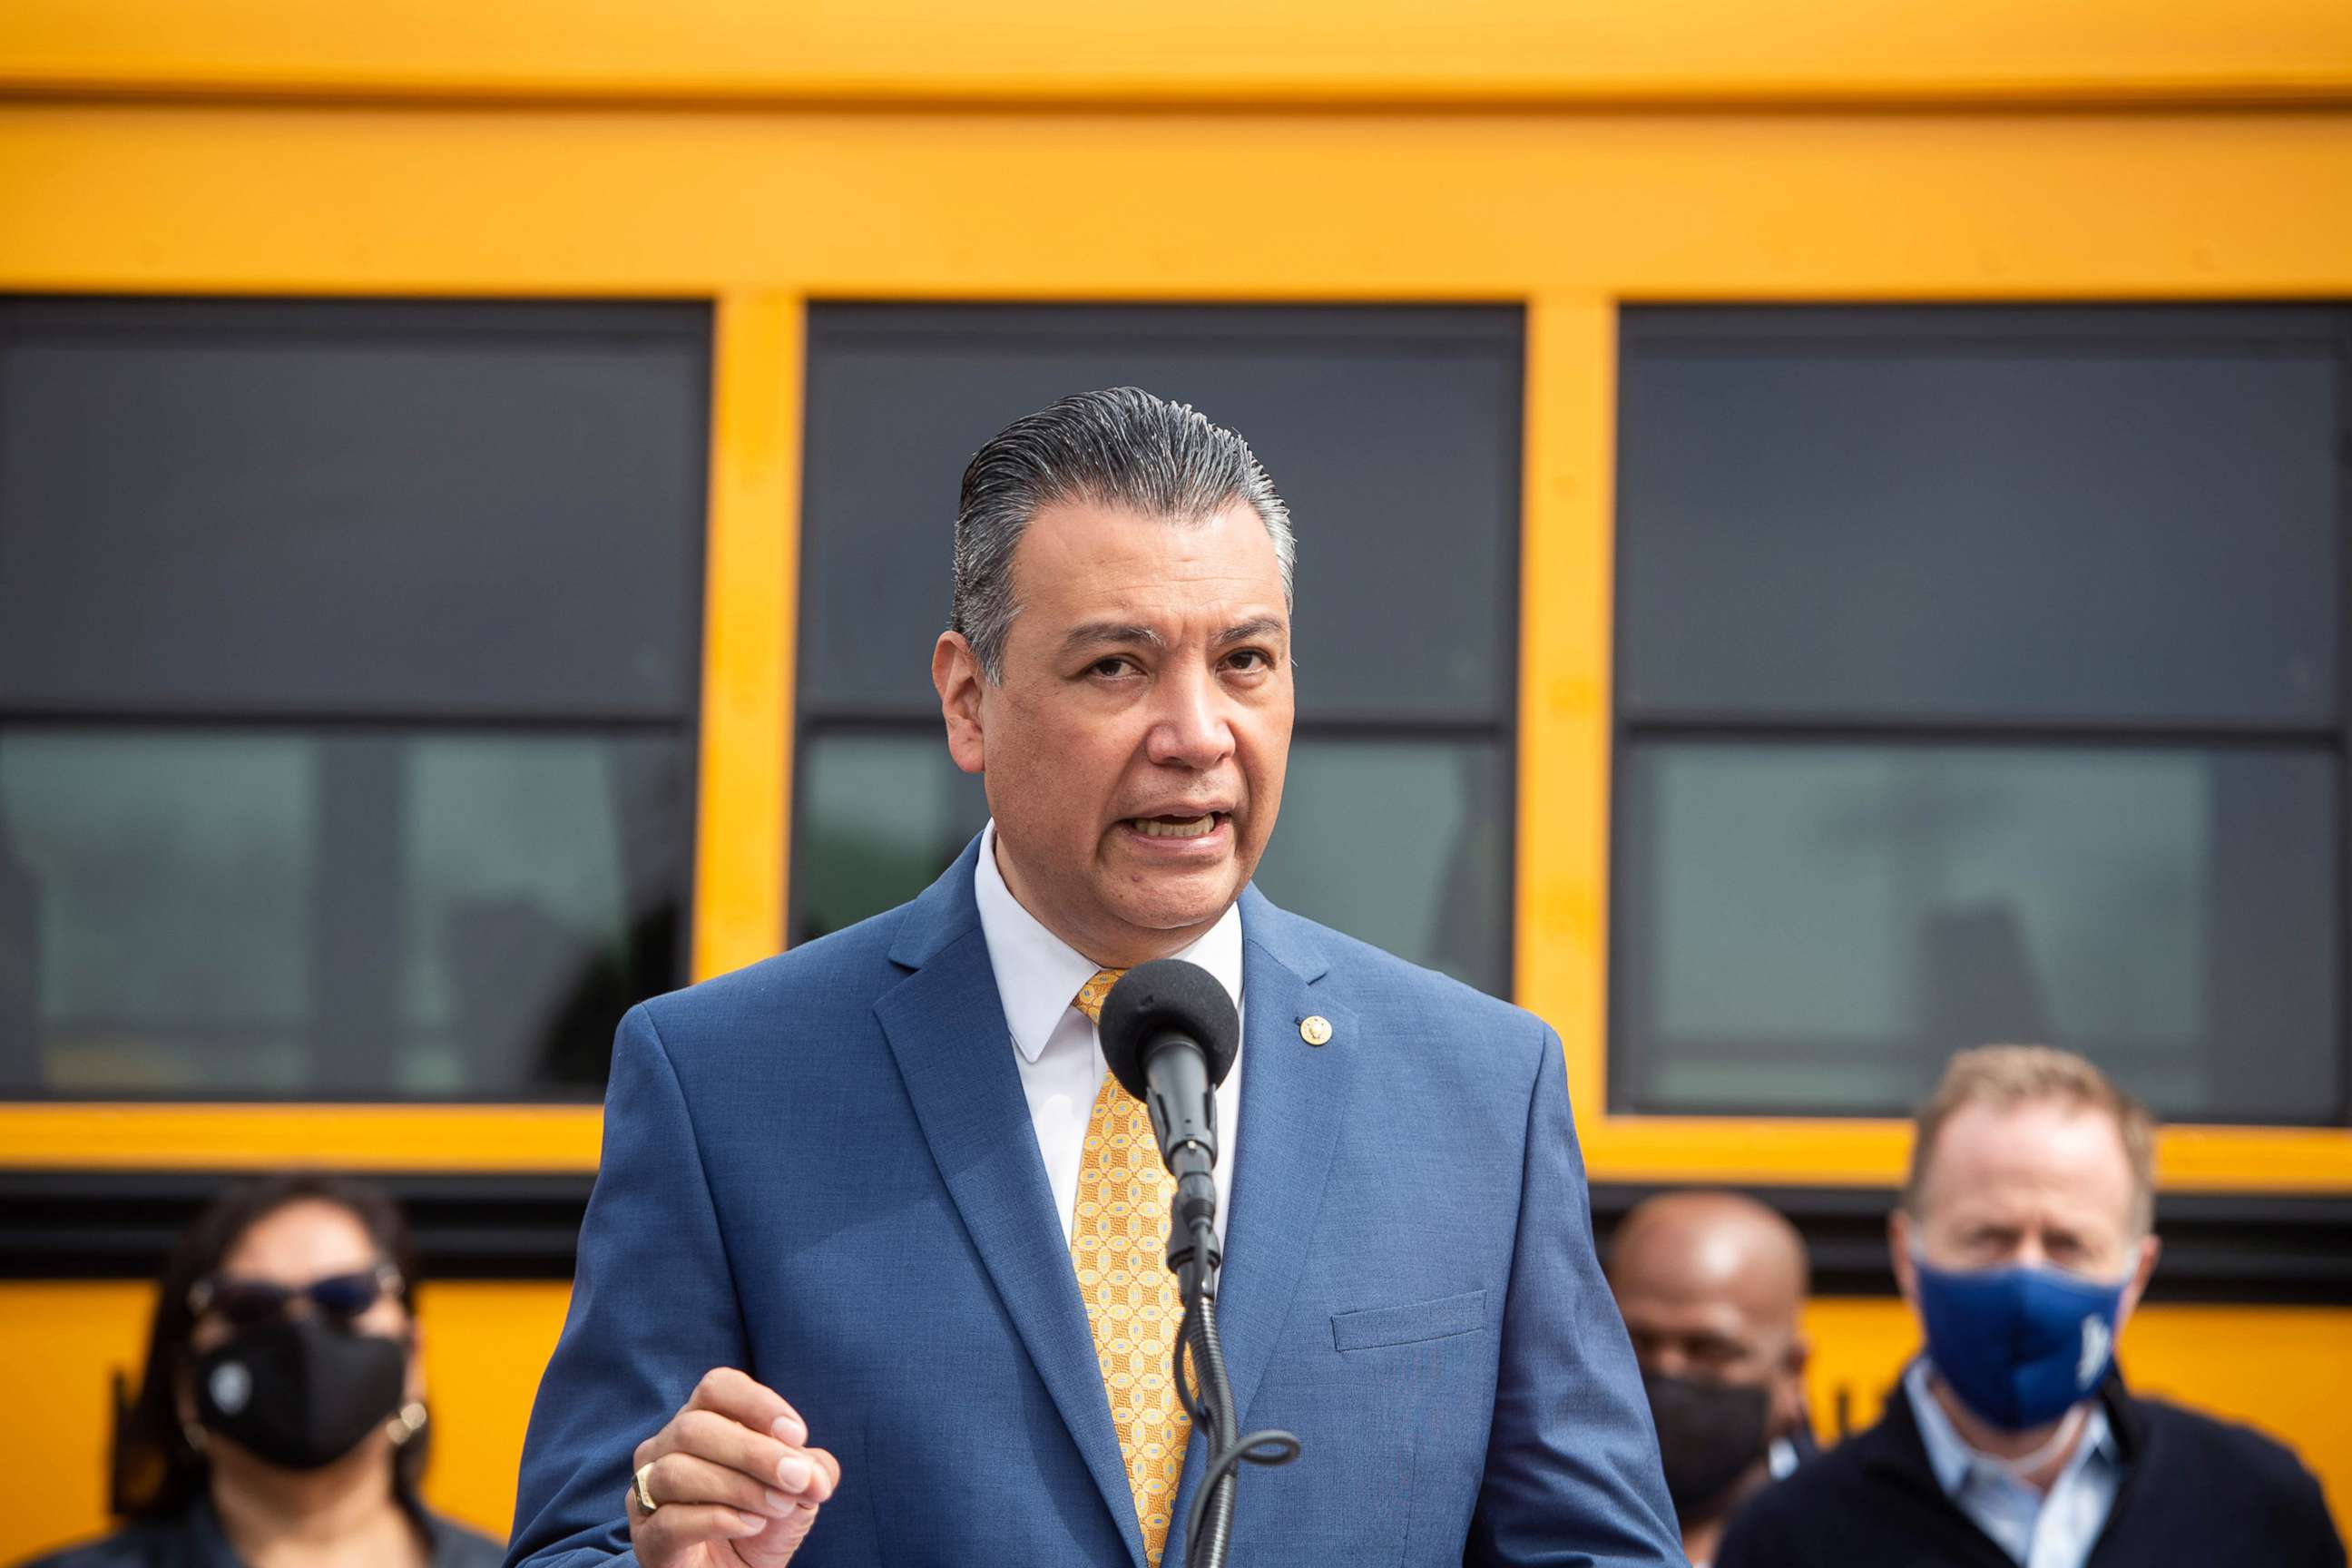 PHOTO: Sen. Alex Padilla speaks during a news conference in front of a LAUSD electric school bus on transitioning America's school bus fleet to electric buses on May 6, 2021 in Los Angeles. 